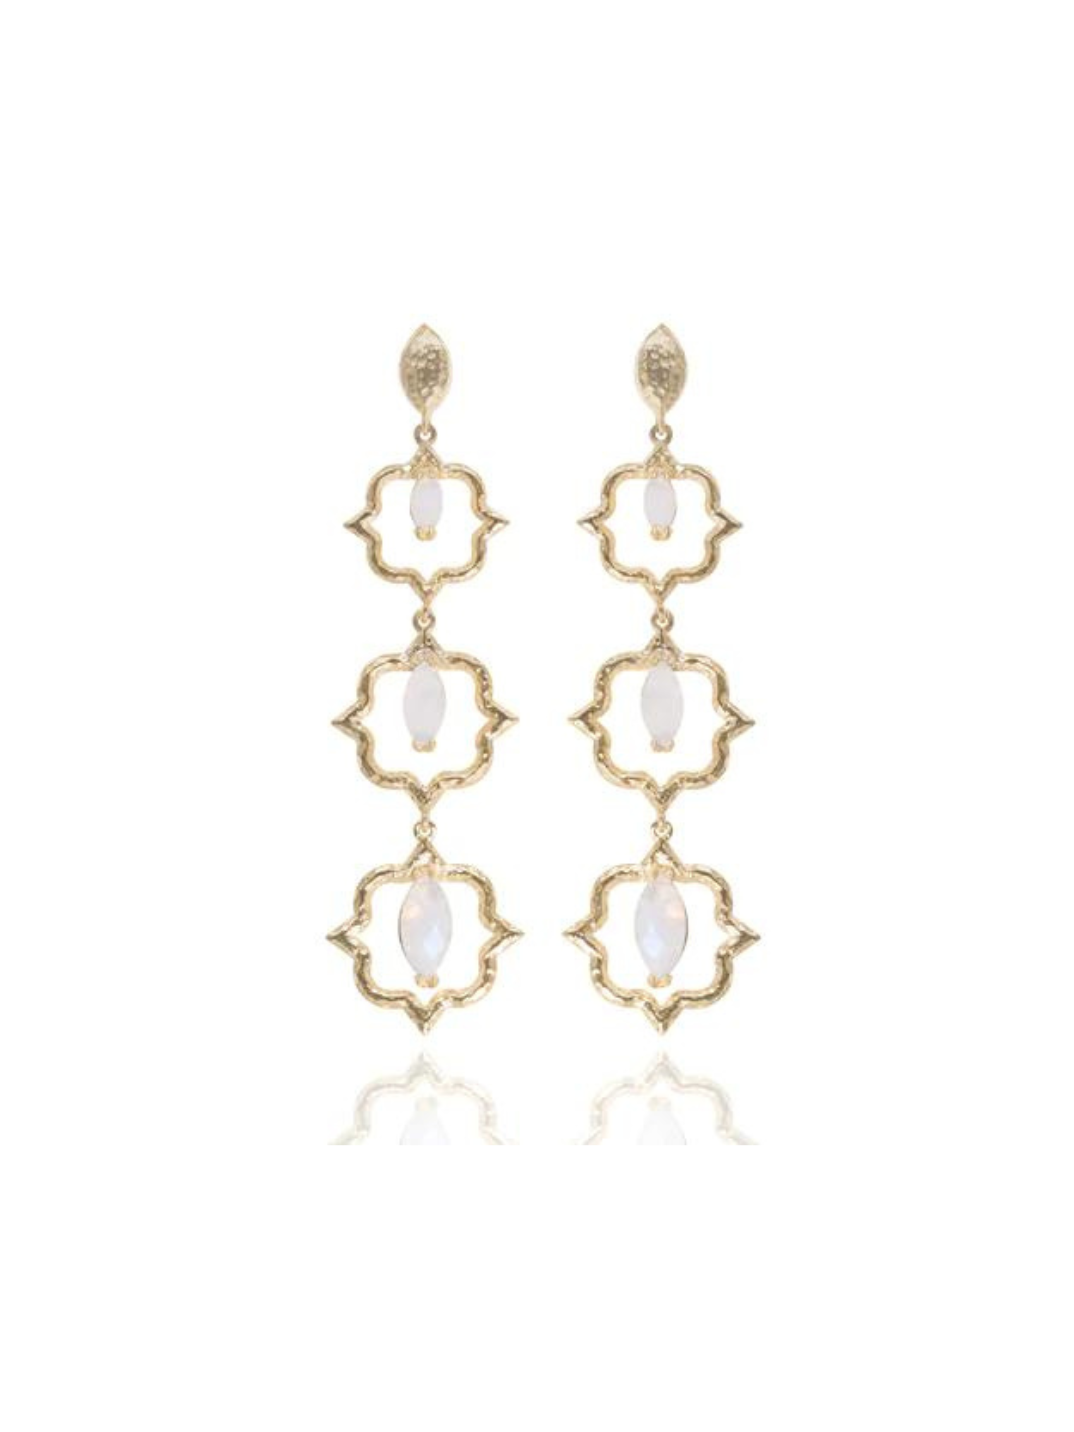 The exquisite combination of moonstone and vermeil gold will make it hard for you to take them off!  Ethical handcrafted sustainable jewelry made with semi-precious stones